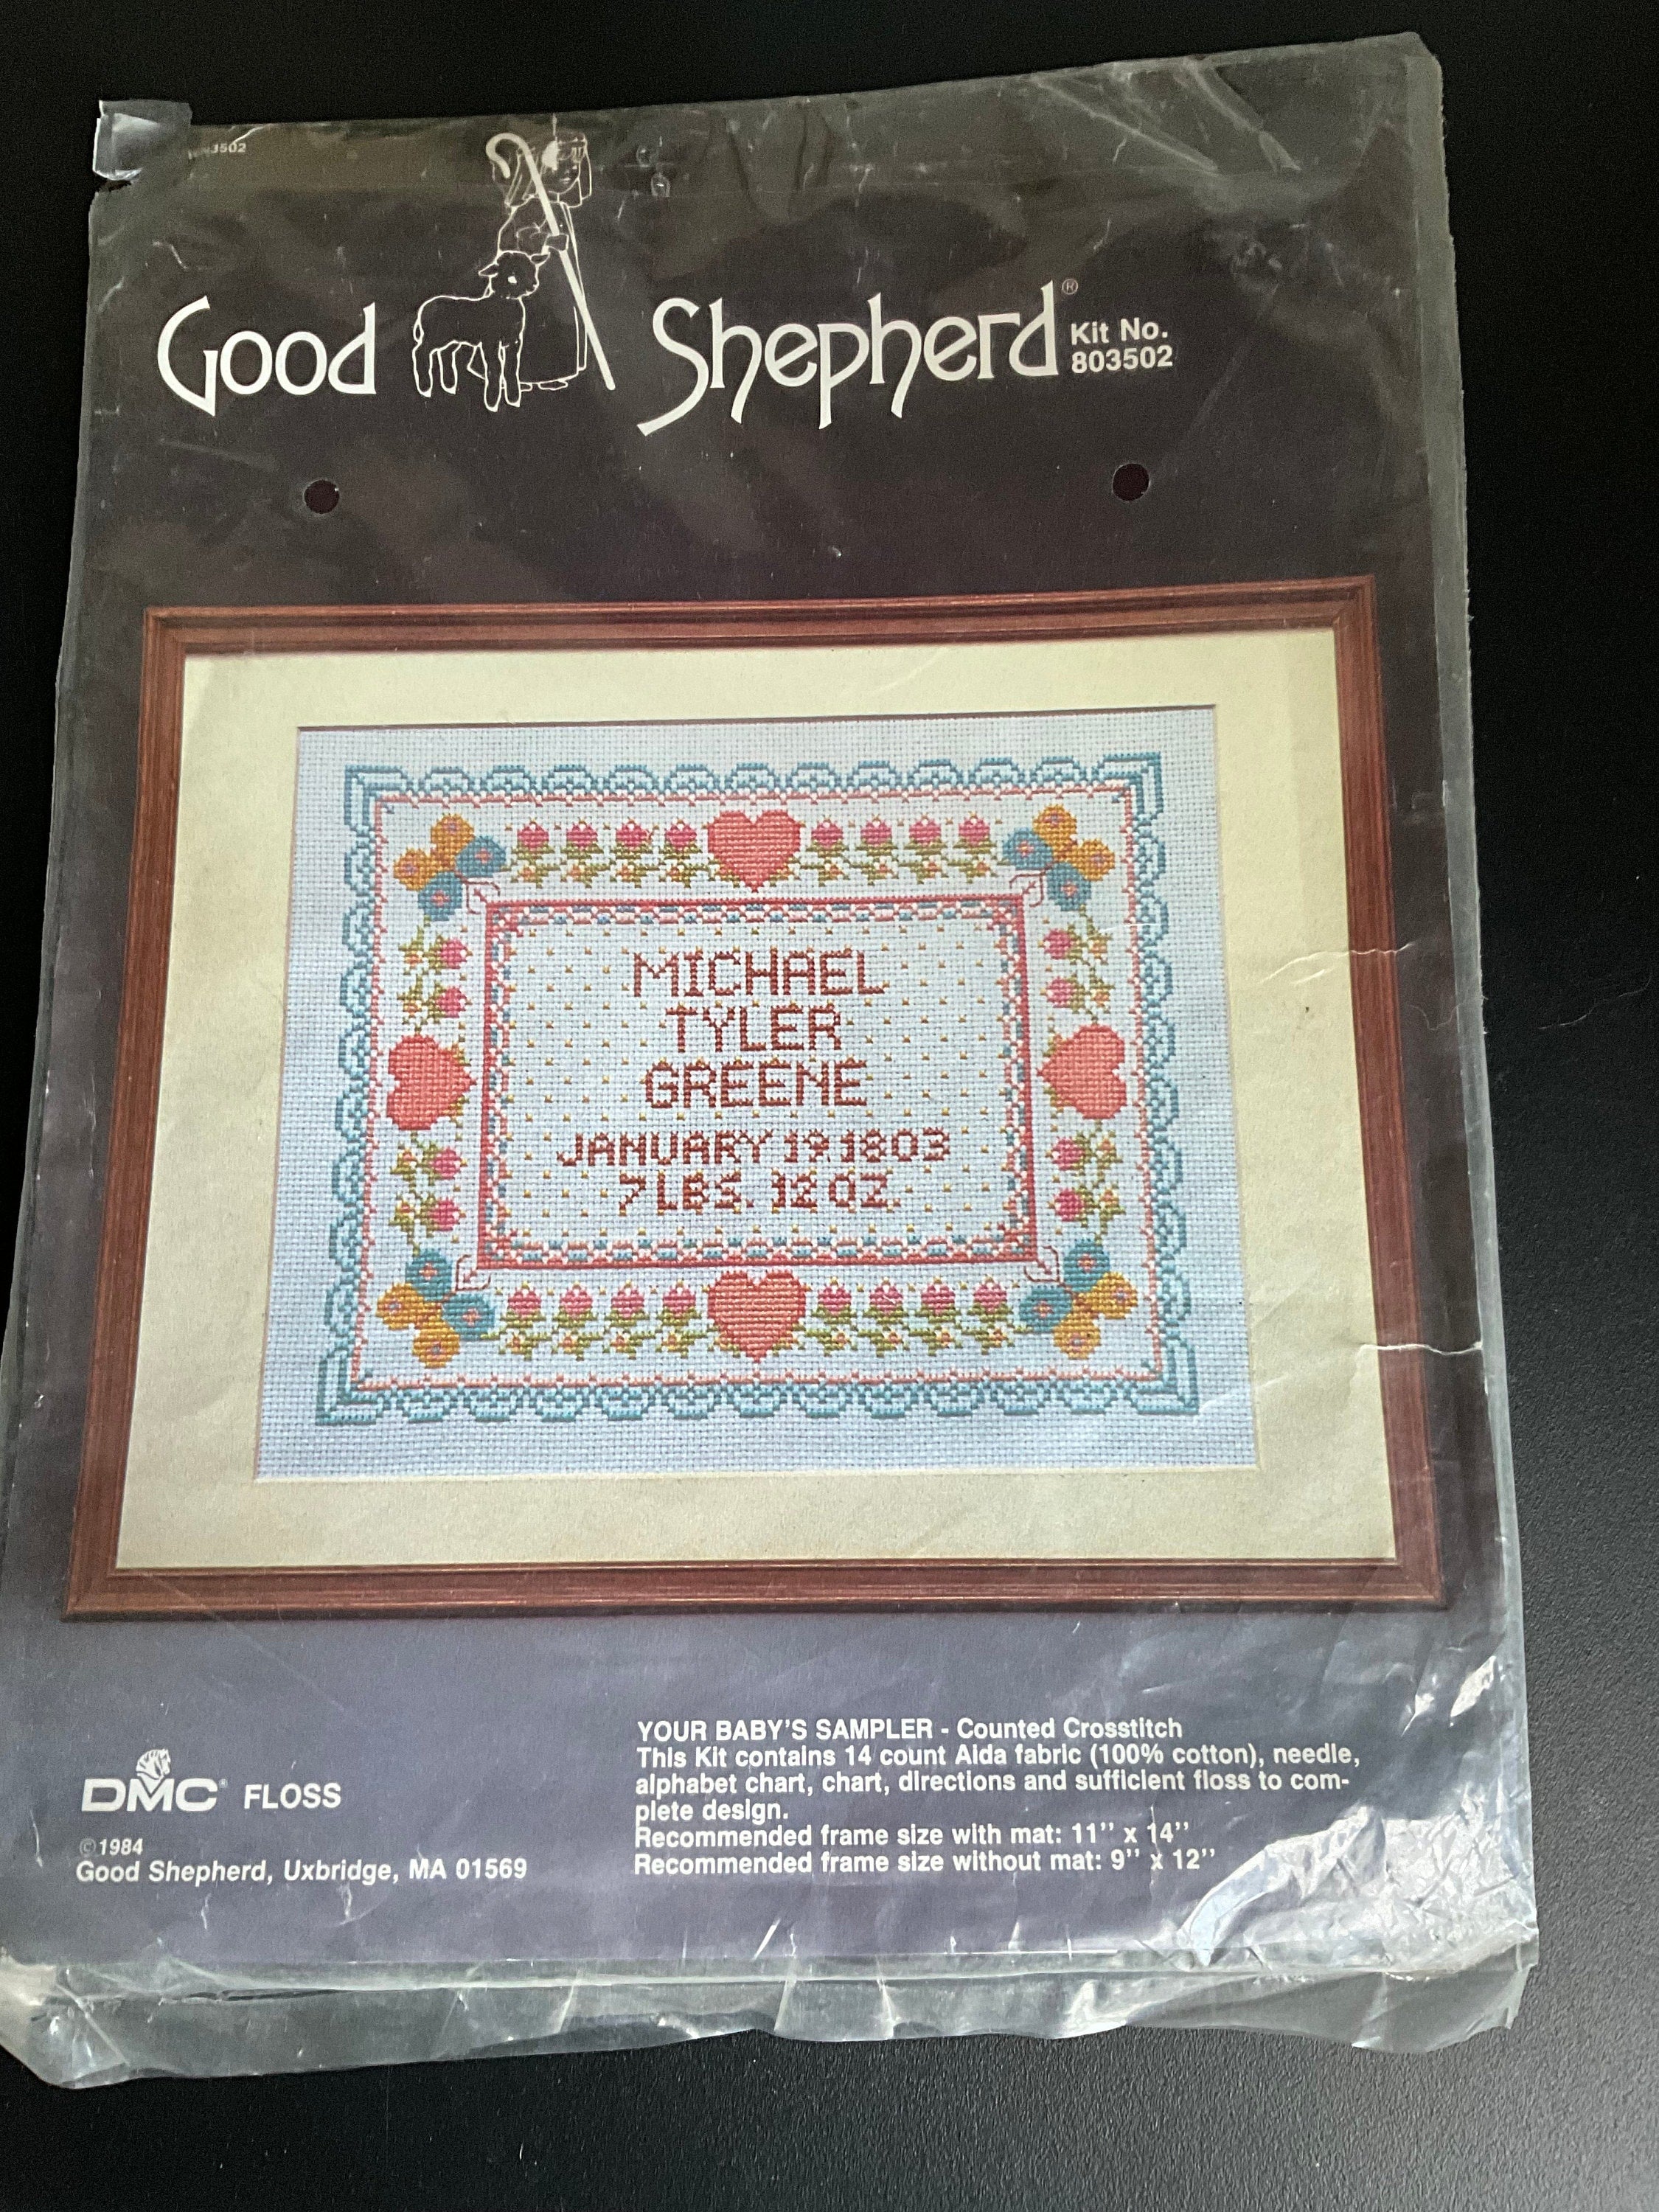 Janlynn Stamped Cross Stitch Kit 12 X10 -Love Is Patient, 1 count